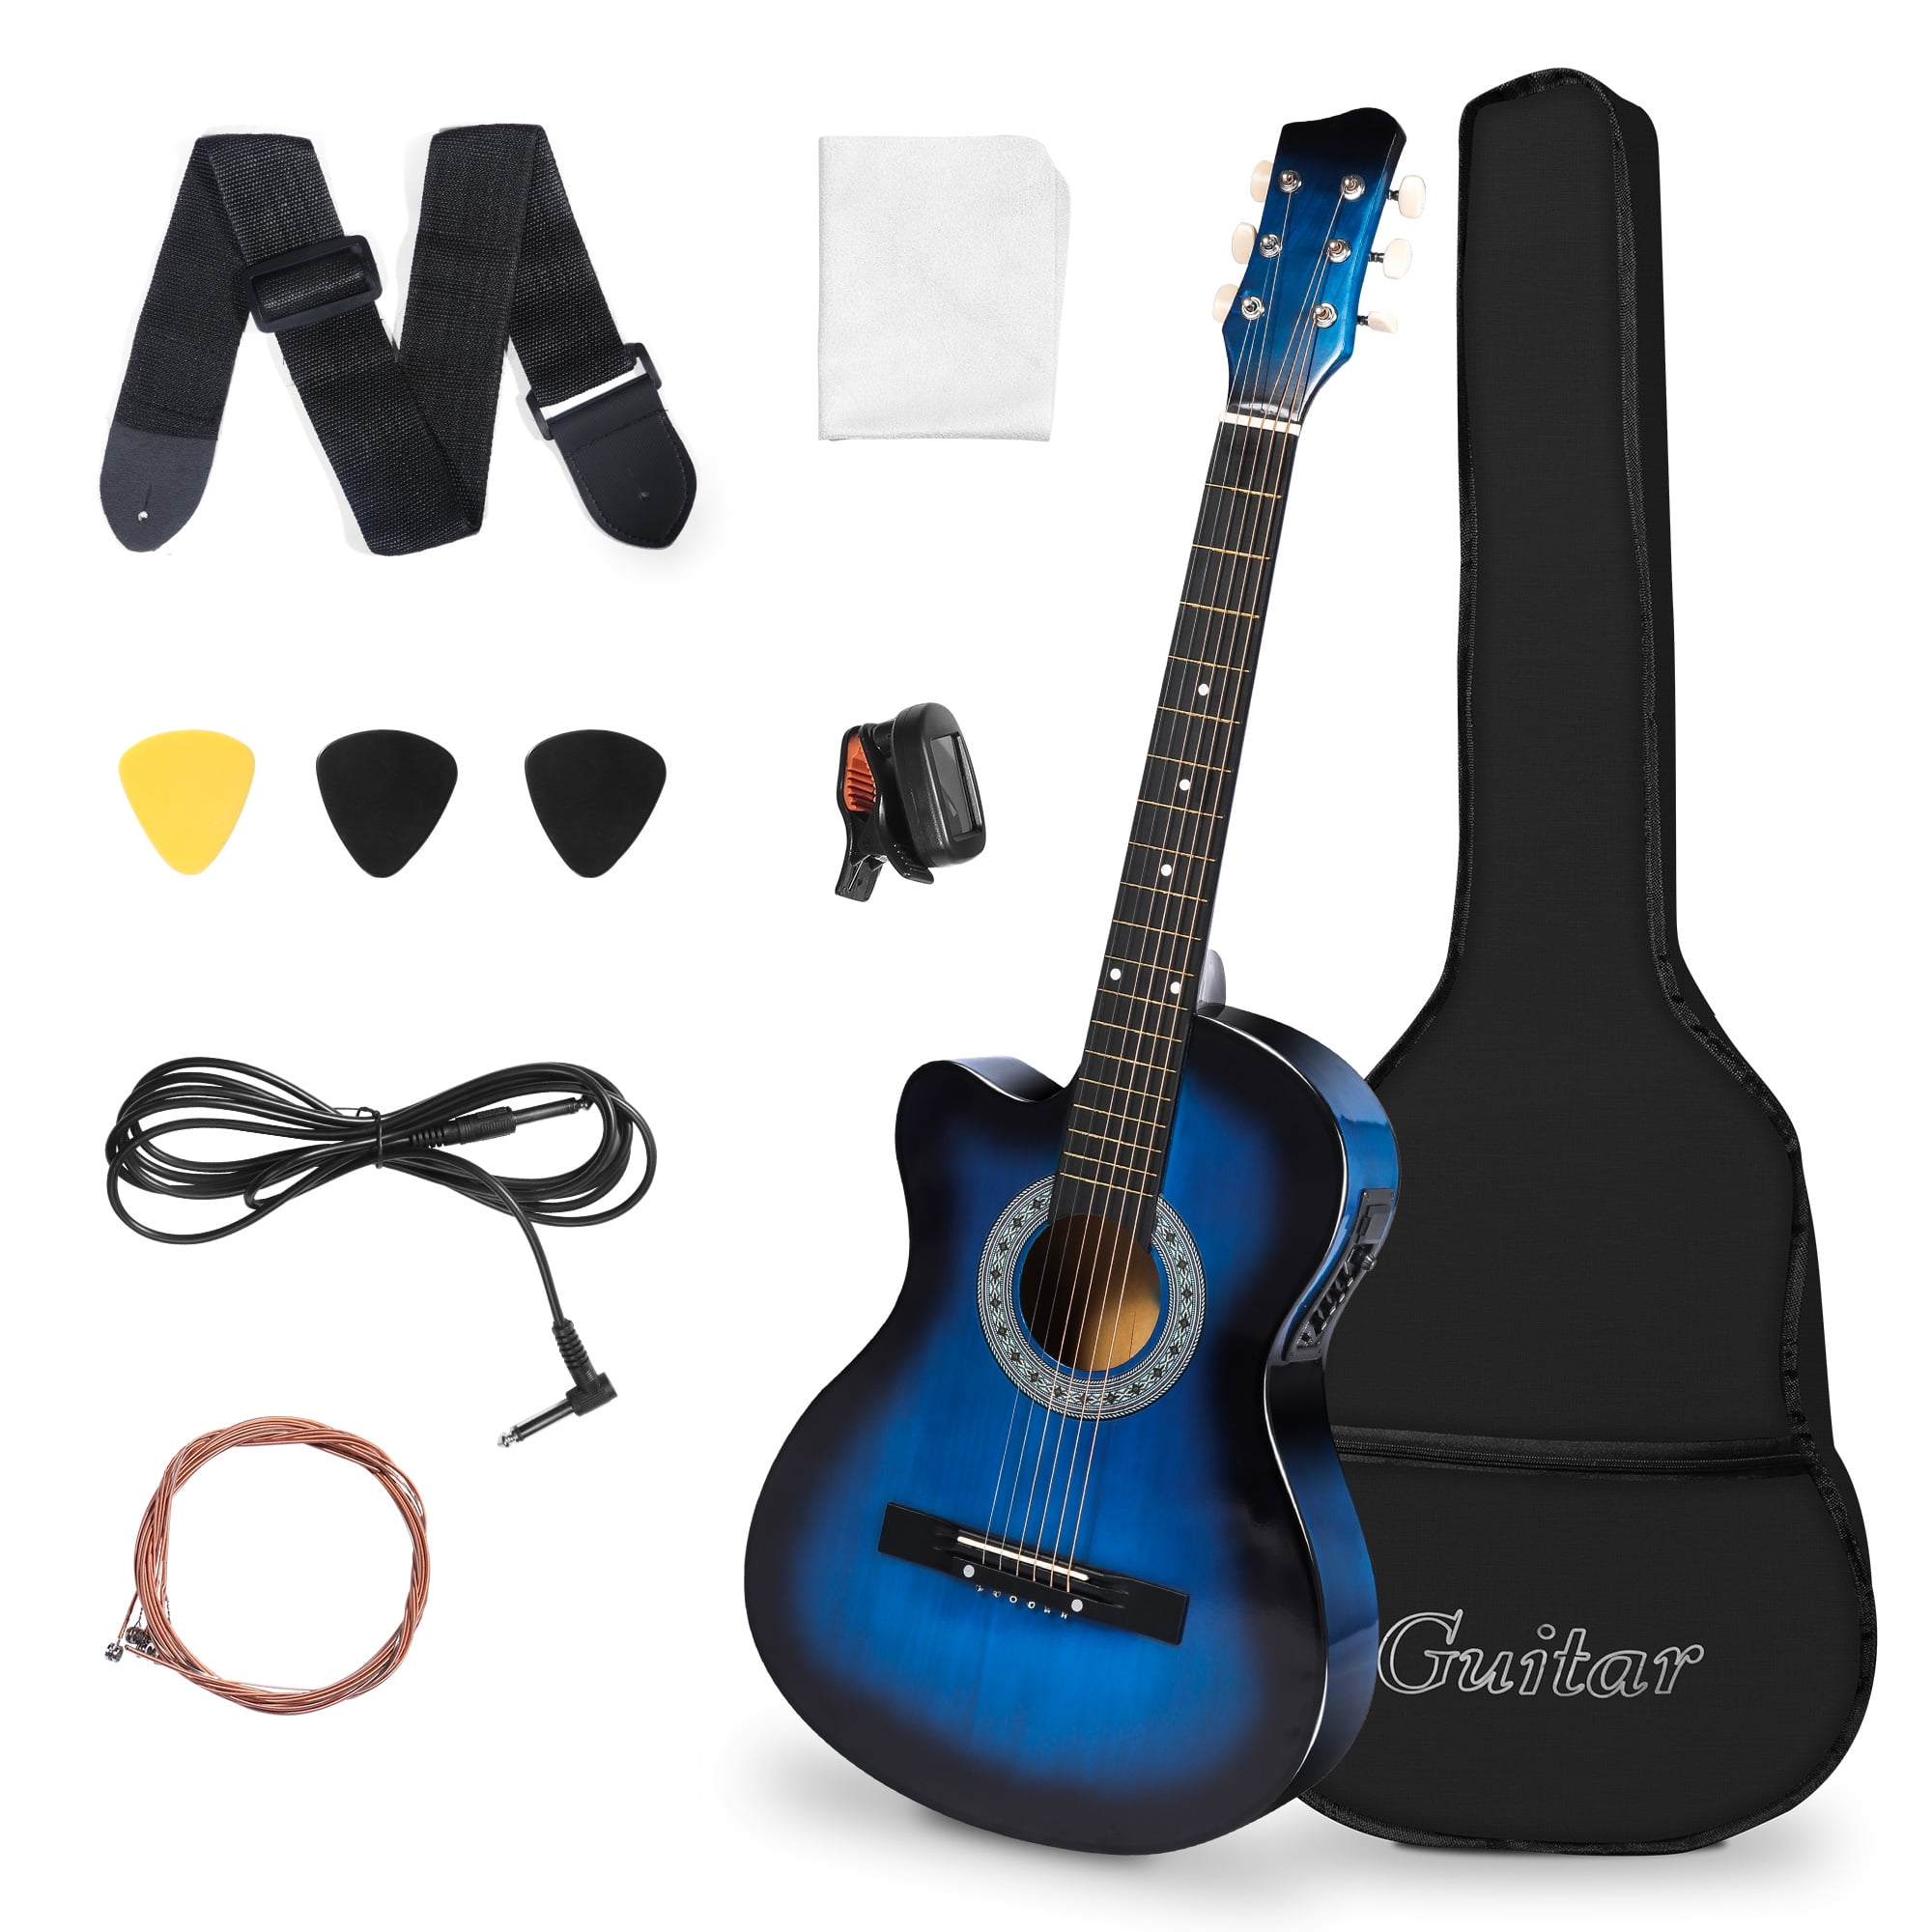 Necessities spise Broom KARMAS PRODUCT 38 Inch Acoustic-Electric Cutaway Guitar Beginner Kit All  Wood Classic Guitar for Teens Kids Adults with 4-Band EQ, Case, Strap,  Picks, Tune, Cable - Blue - Walmart.com